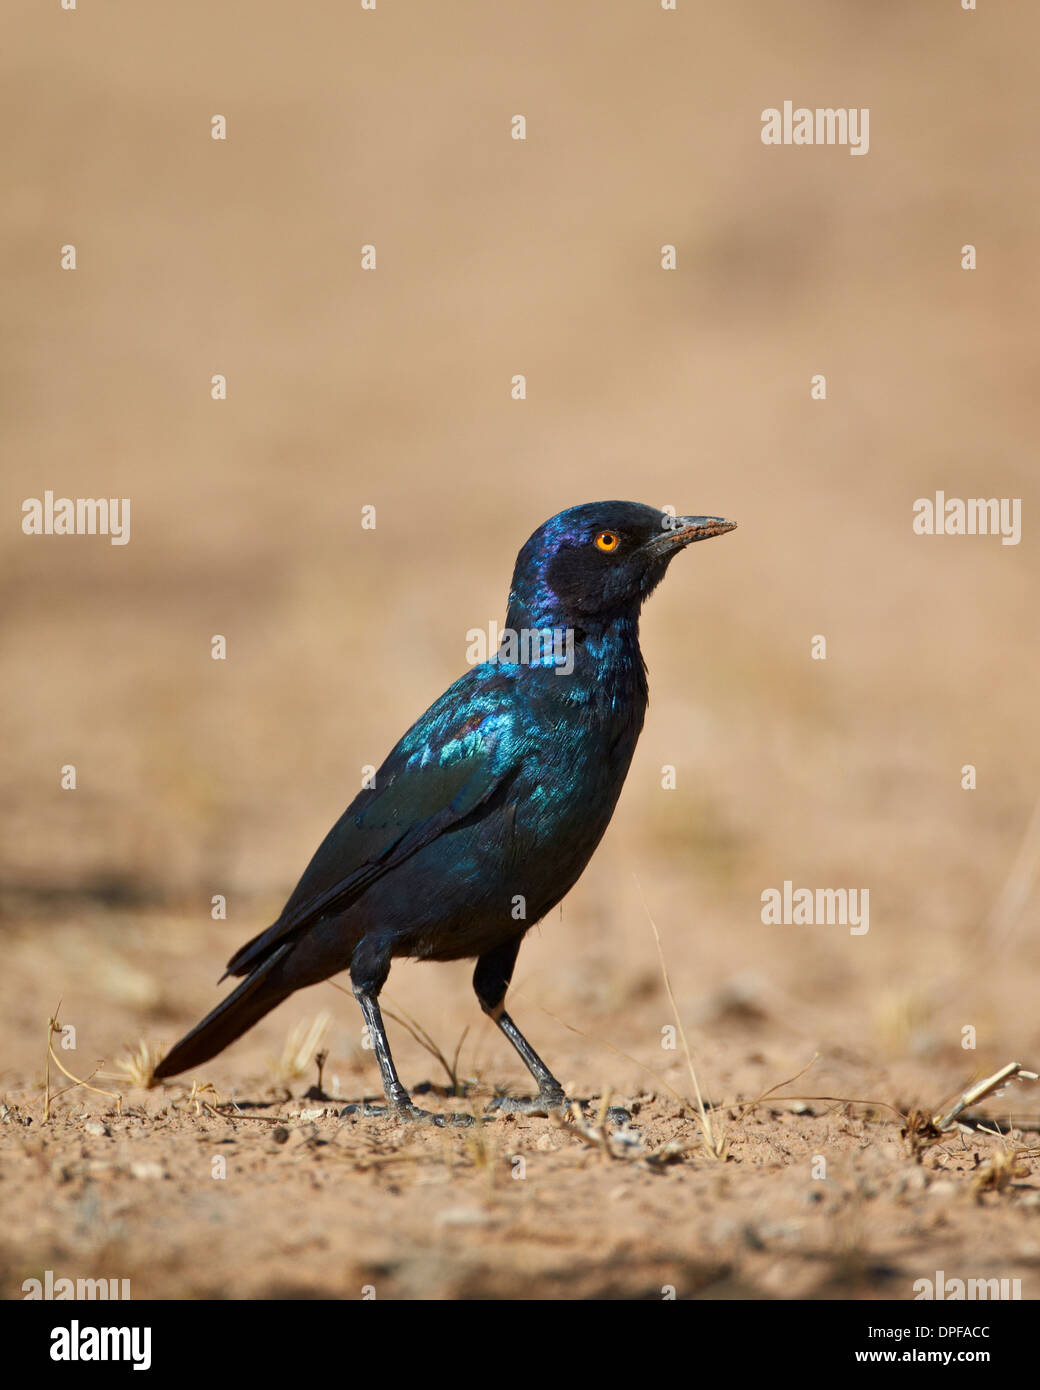 Cape glossy starling (Lamprotornis nitens), Kgalagadi Transfrontier Park, South Africa Stock Photo